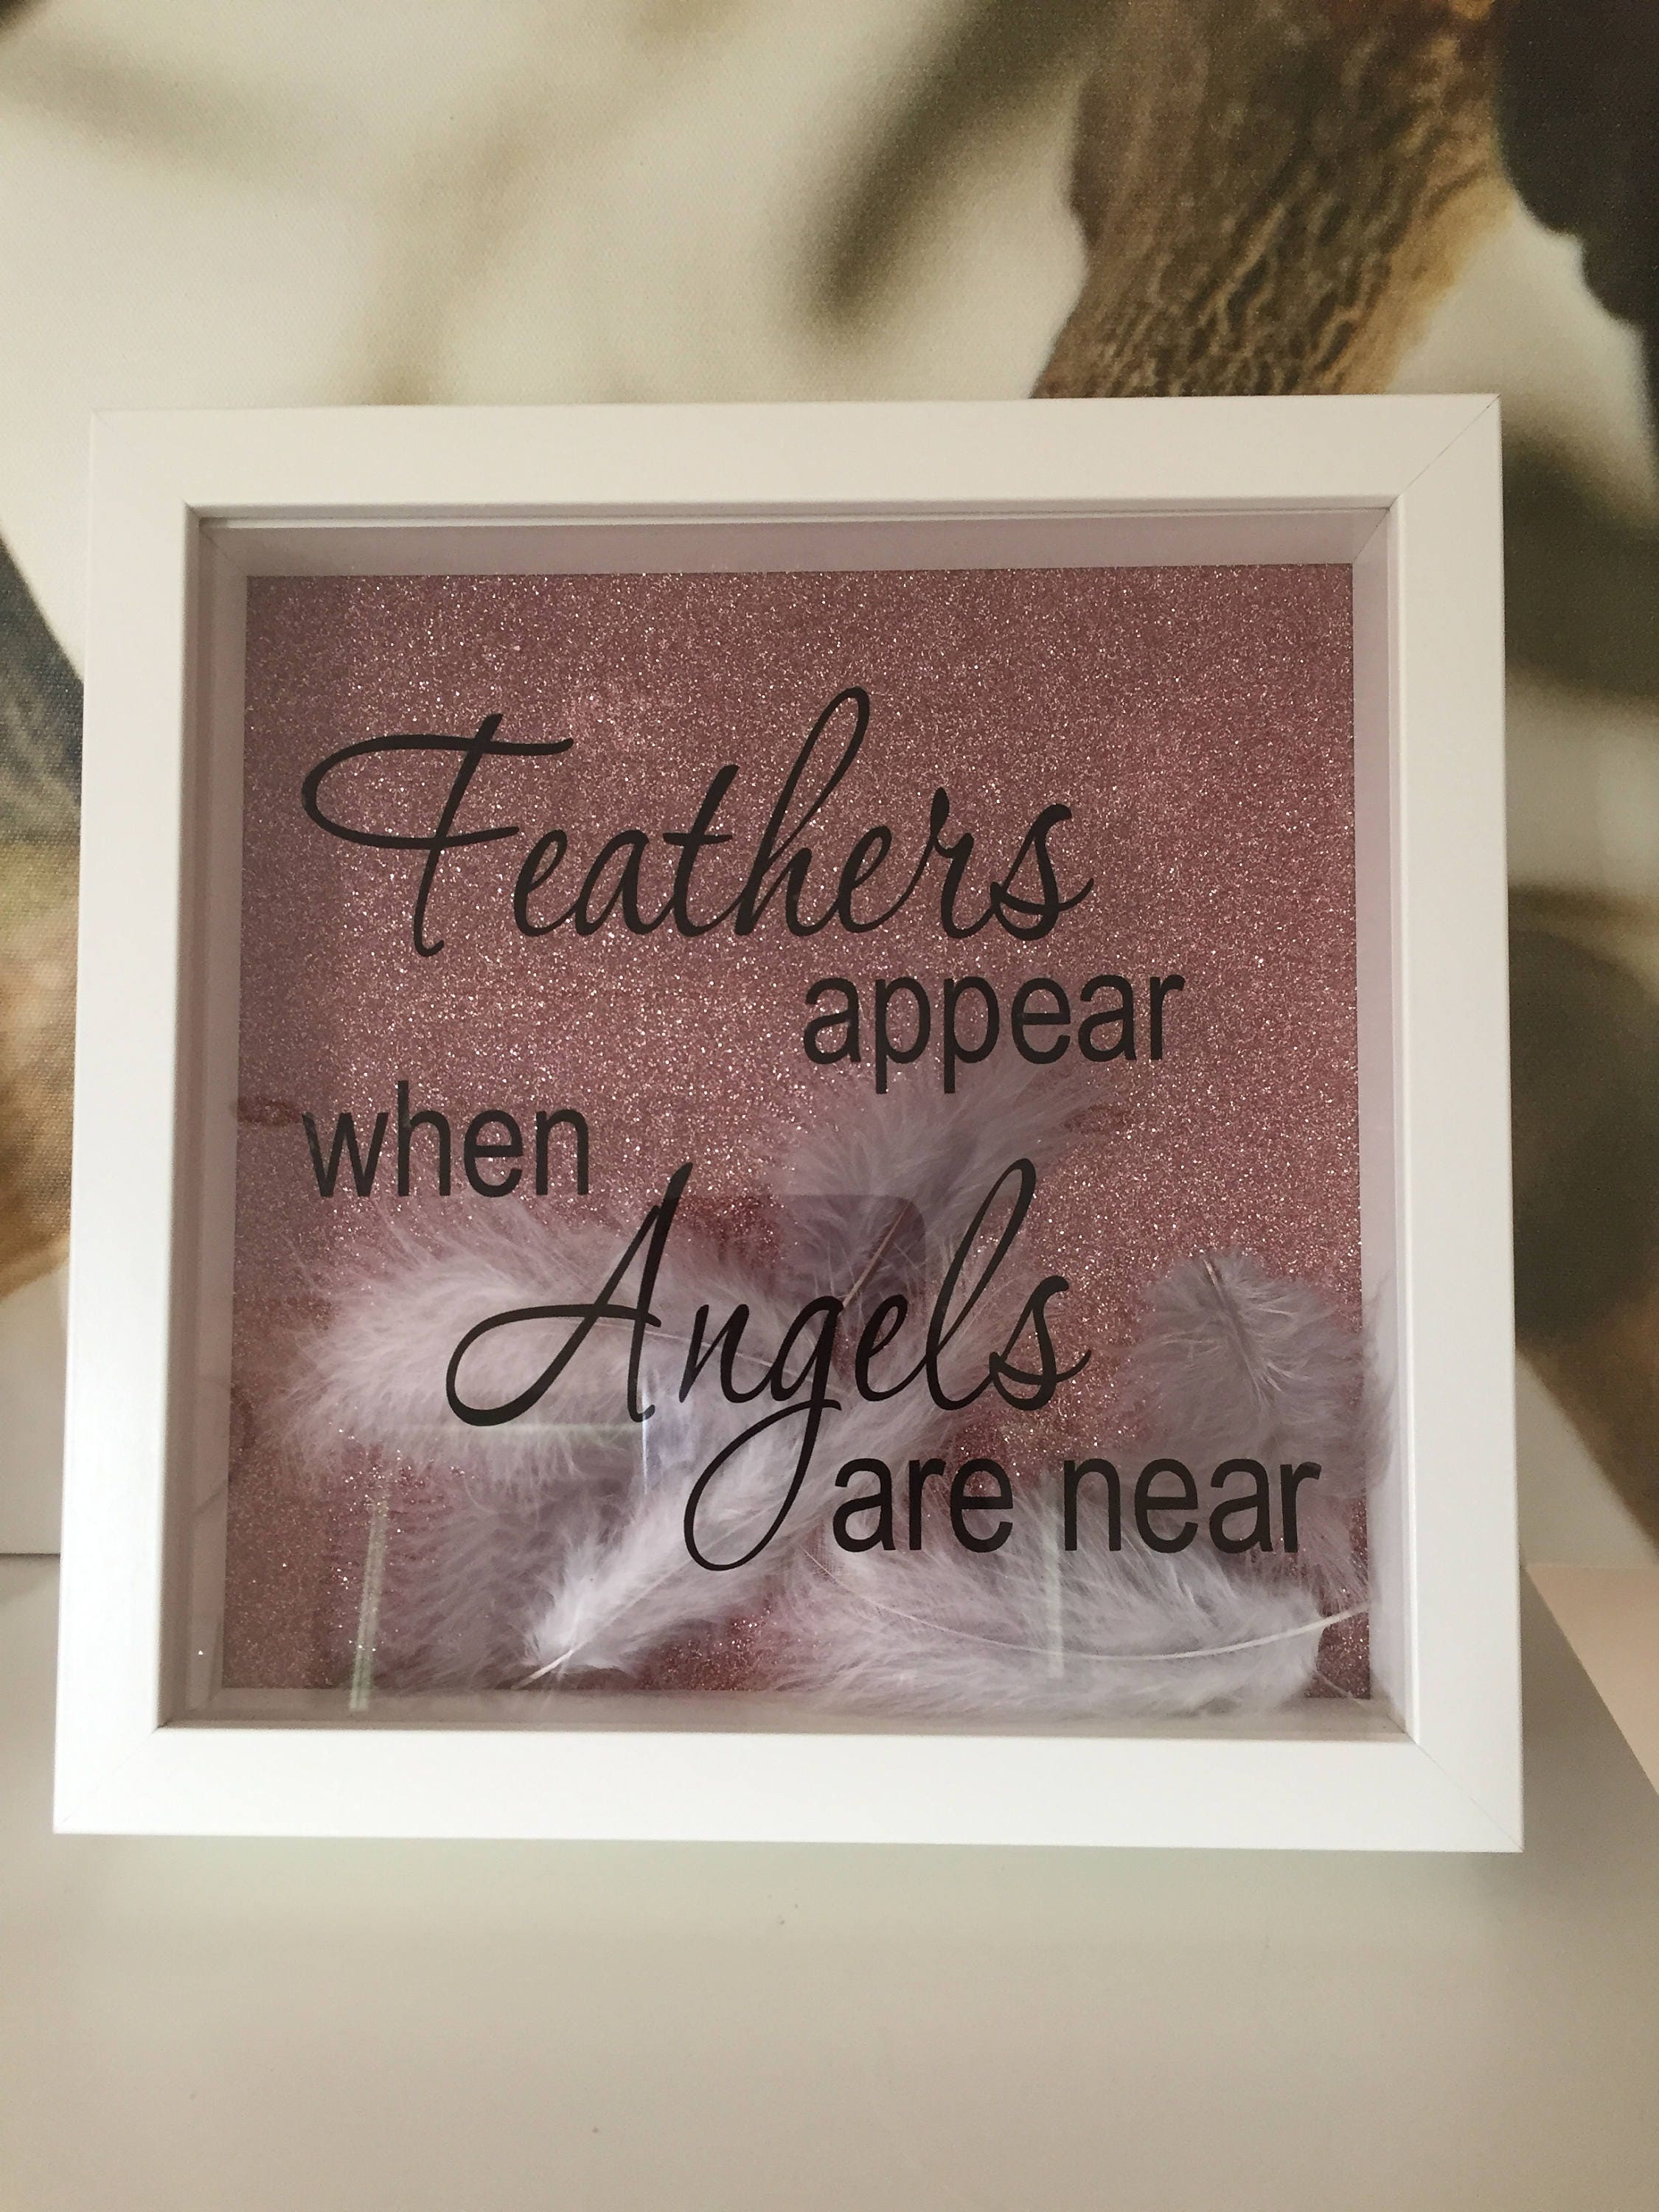 Details about   Picture Box Frame Handmade Feathers Appear When Angels Are Near Sparkle Glitter 